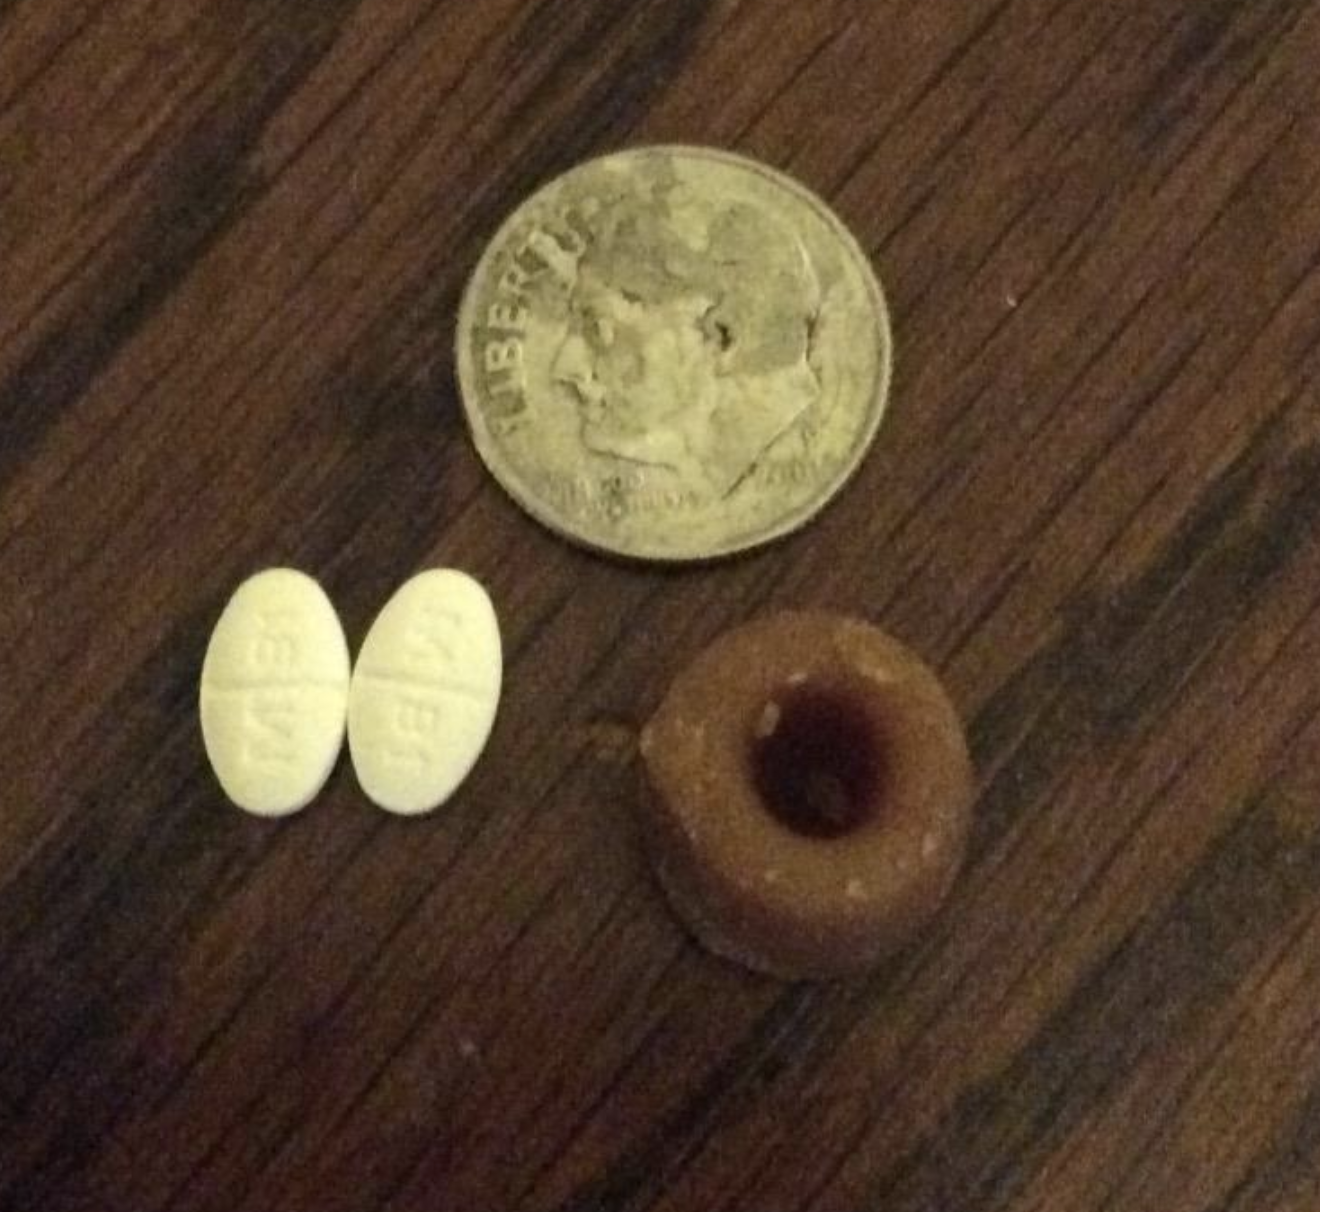 a greenie treat next to two pills and a coin for size